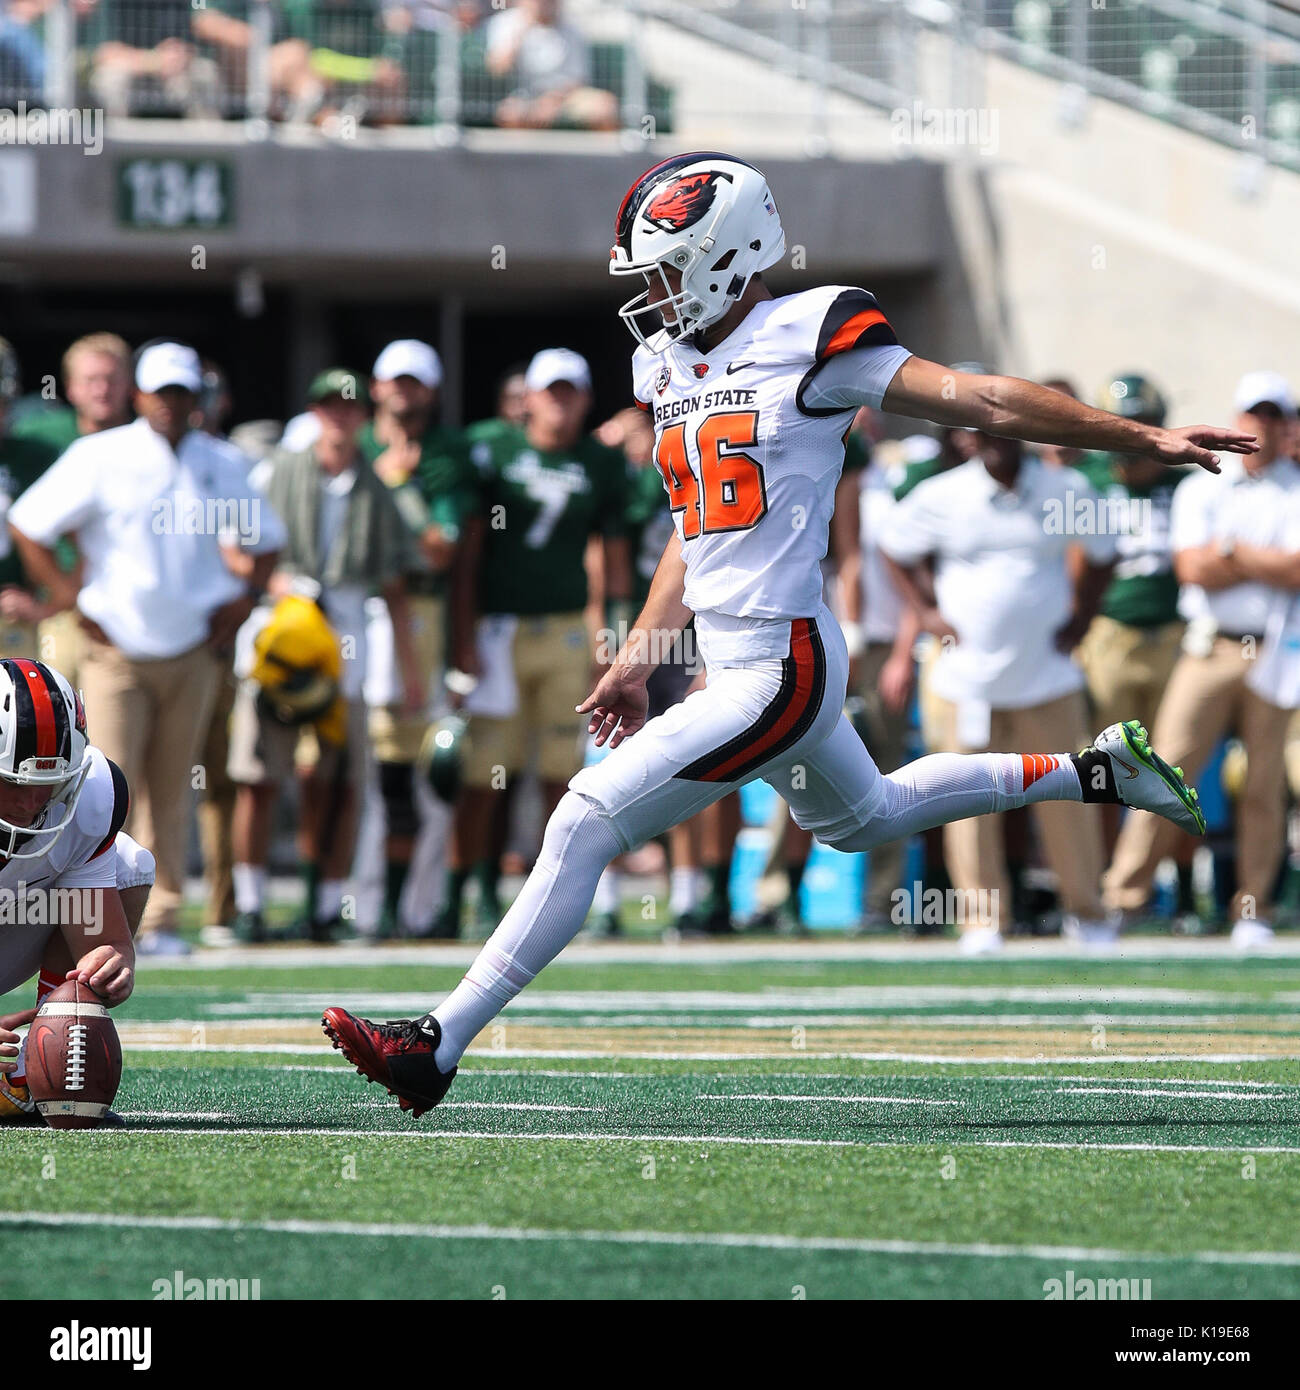 August 26, 2017: Oregon State kicker Jordan Choukair attempts a field goal against Colorado State in the second half. Stock Photo